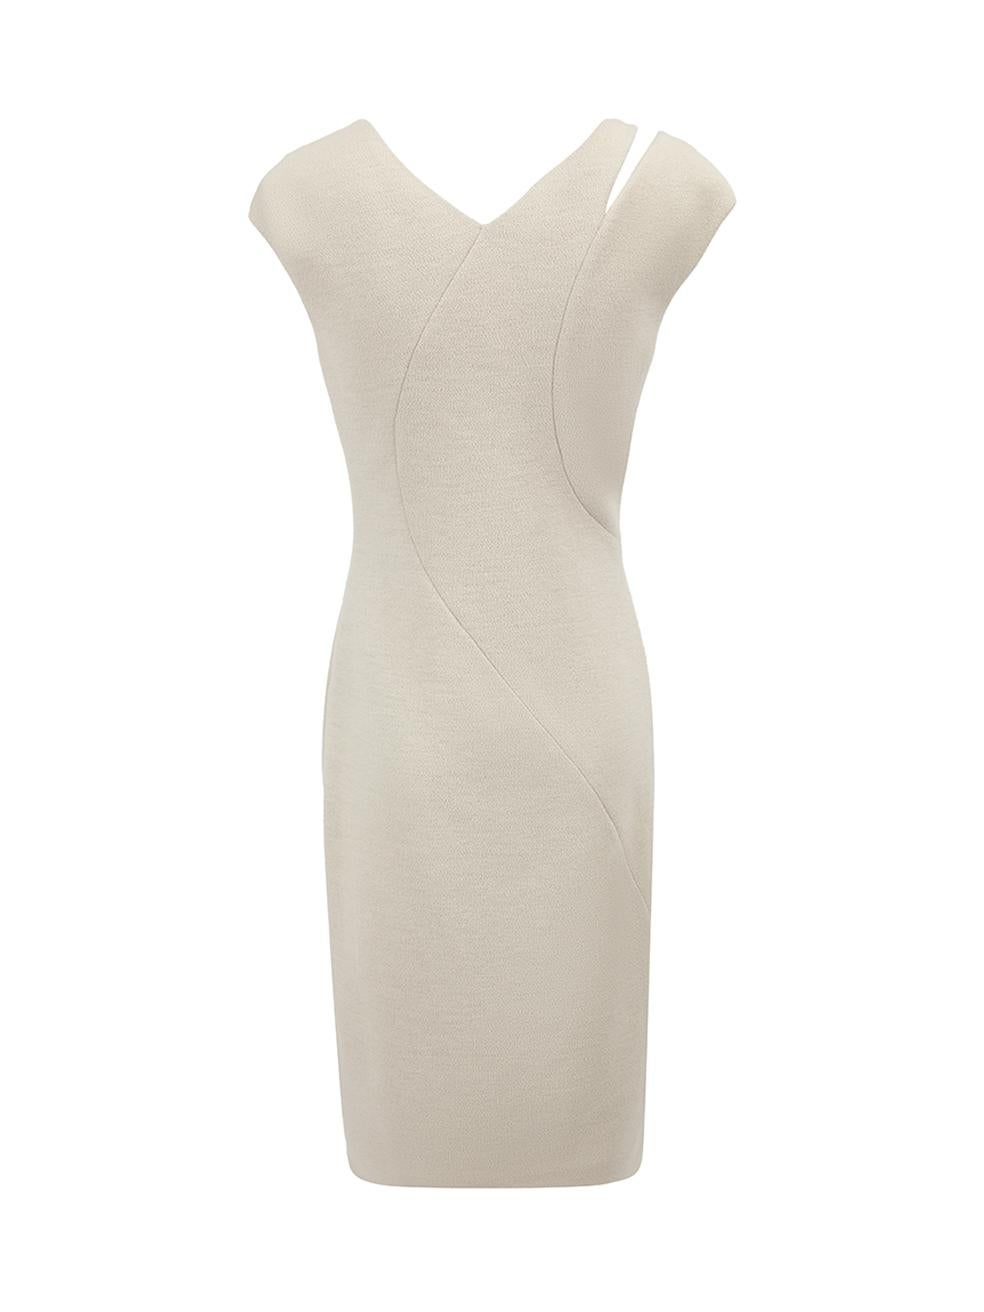 Grey Wool Sleeveless Body-con Dress Size L In Good Condition For Sale In London, GB